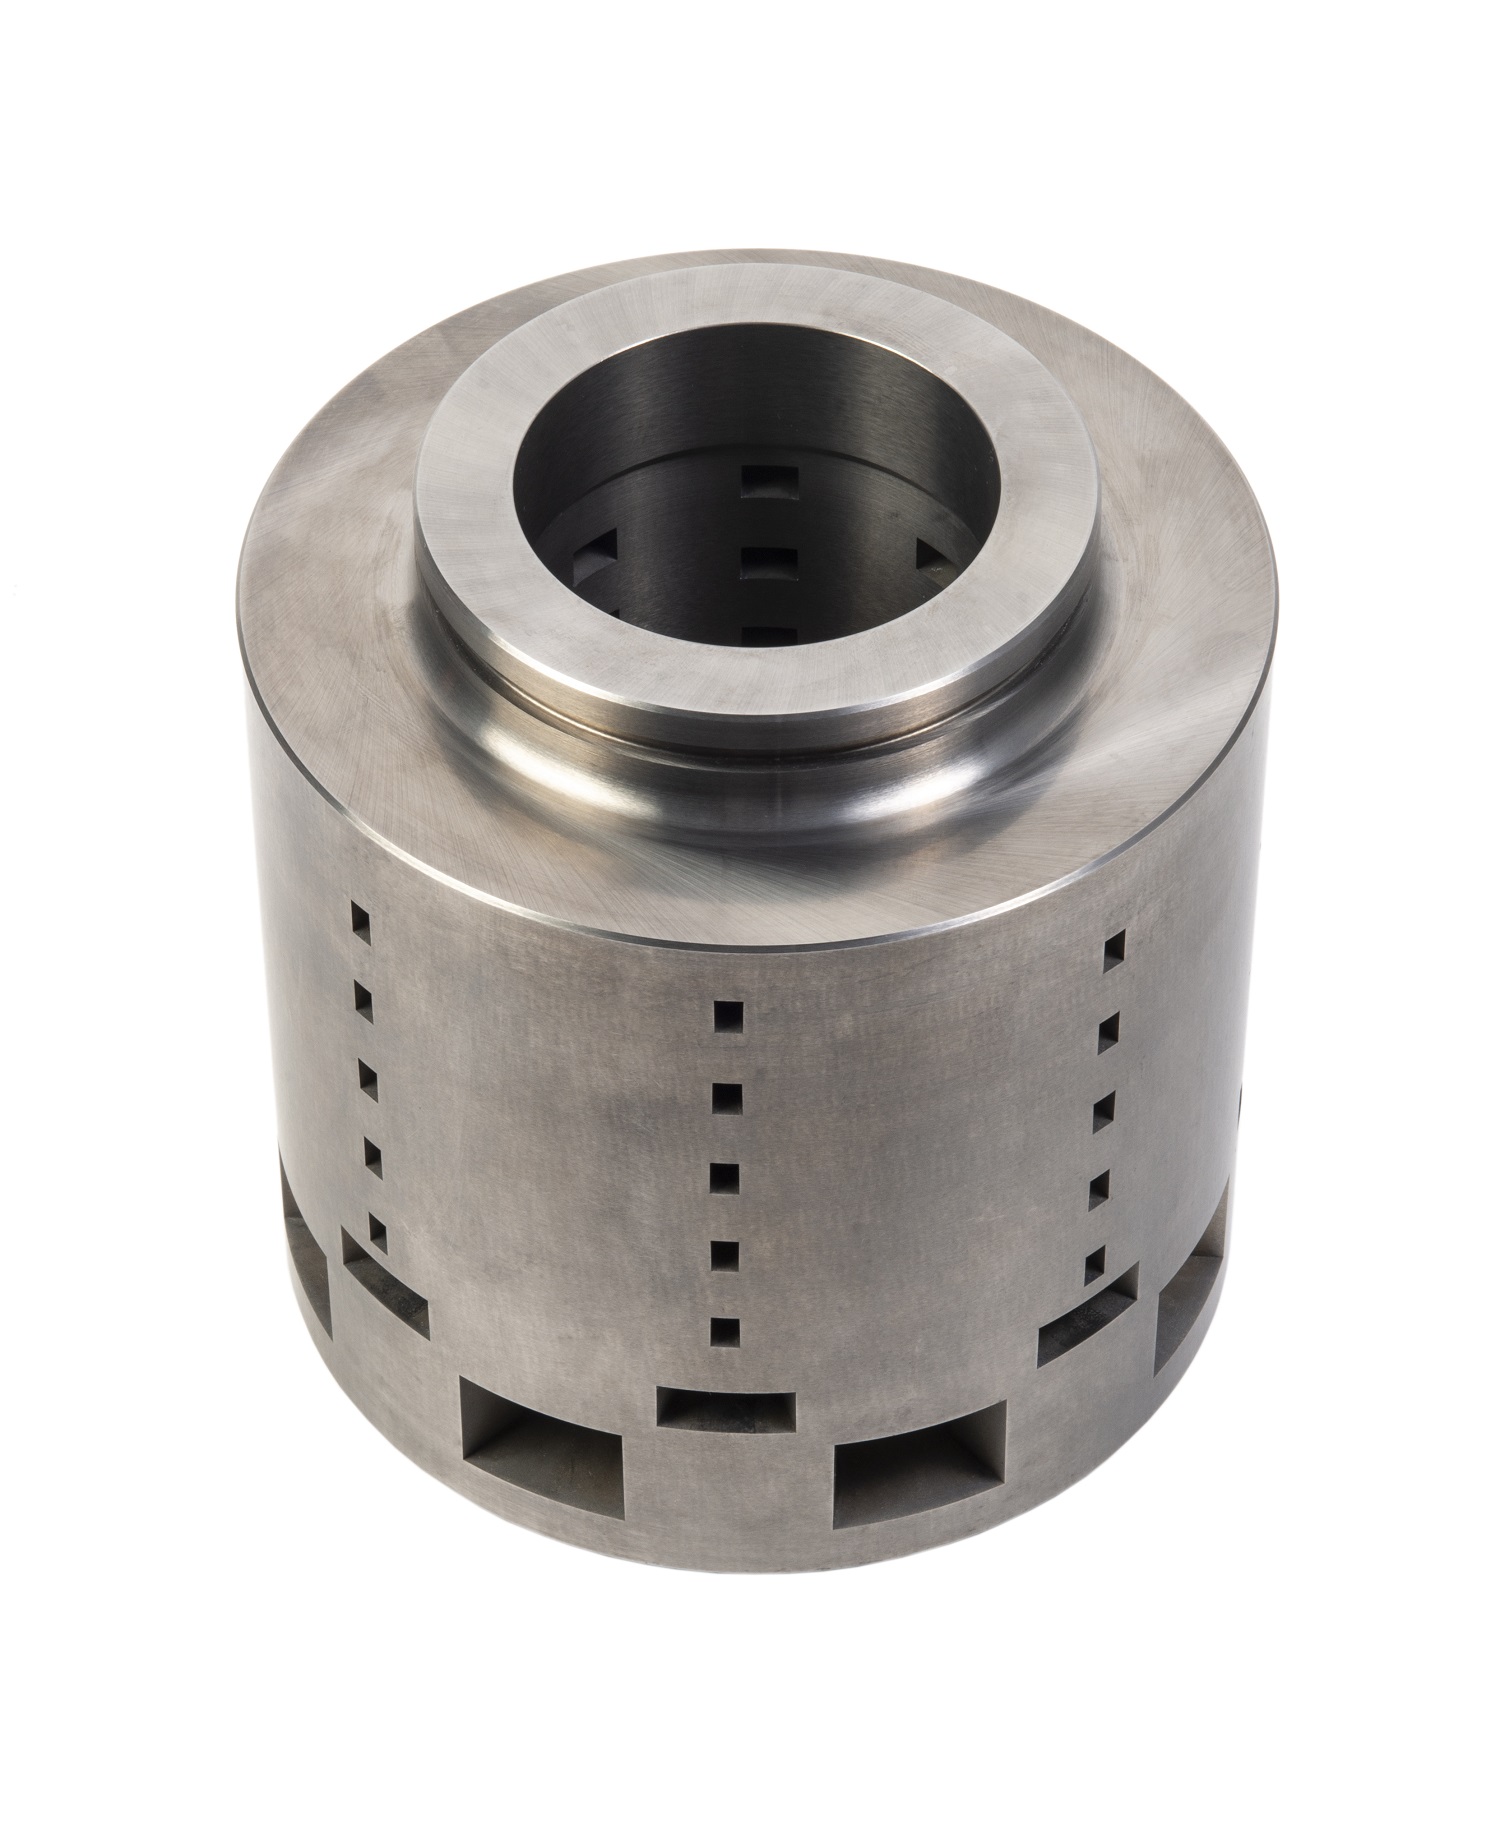 Hyperion manufactures tungsten carbide parts for oil & gas service providers.